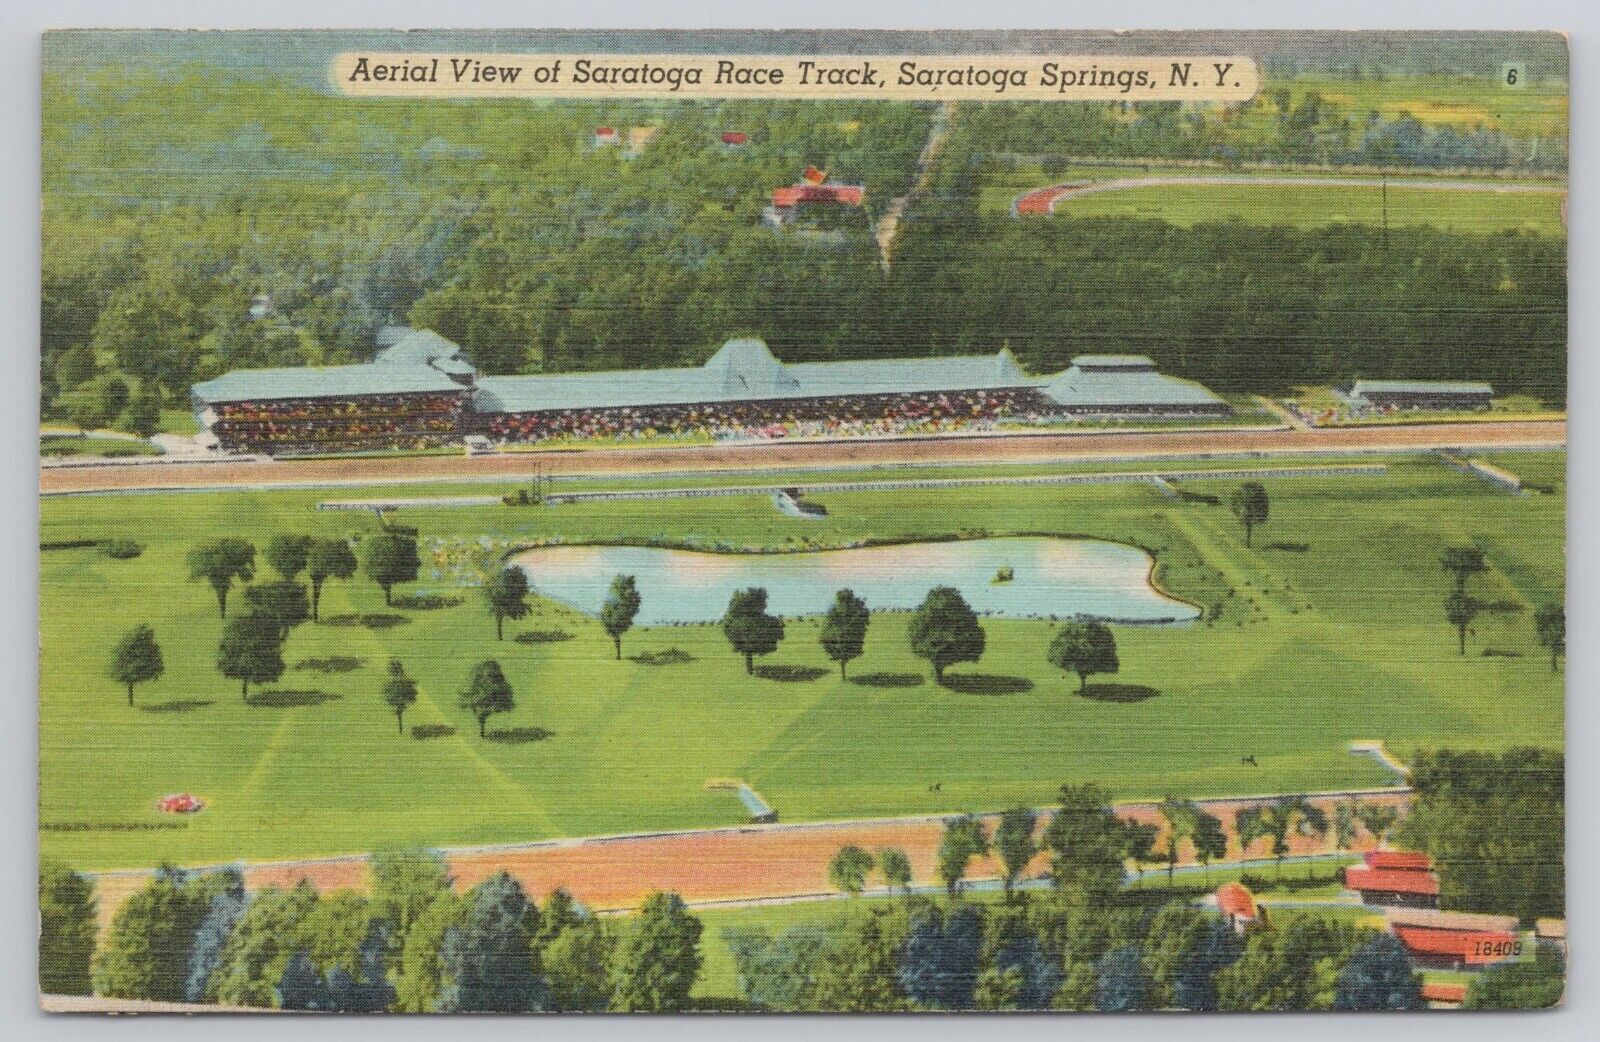 Vtg Post Card Aerial View of Saratoga Race Track, Saratoga Springs, N.Y. F49